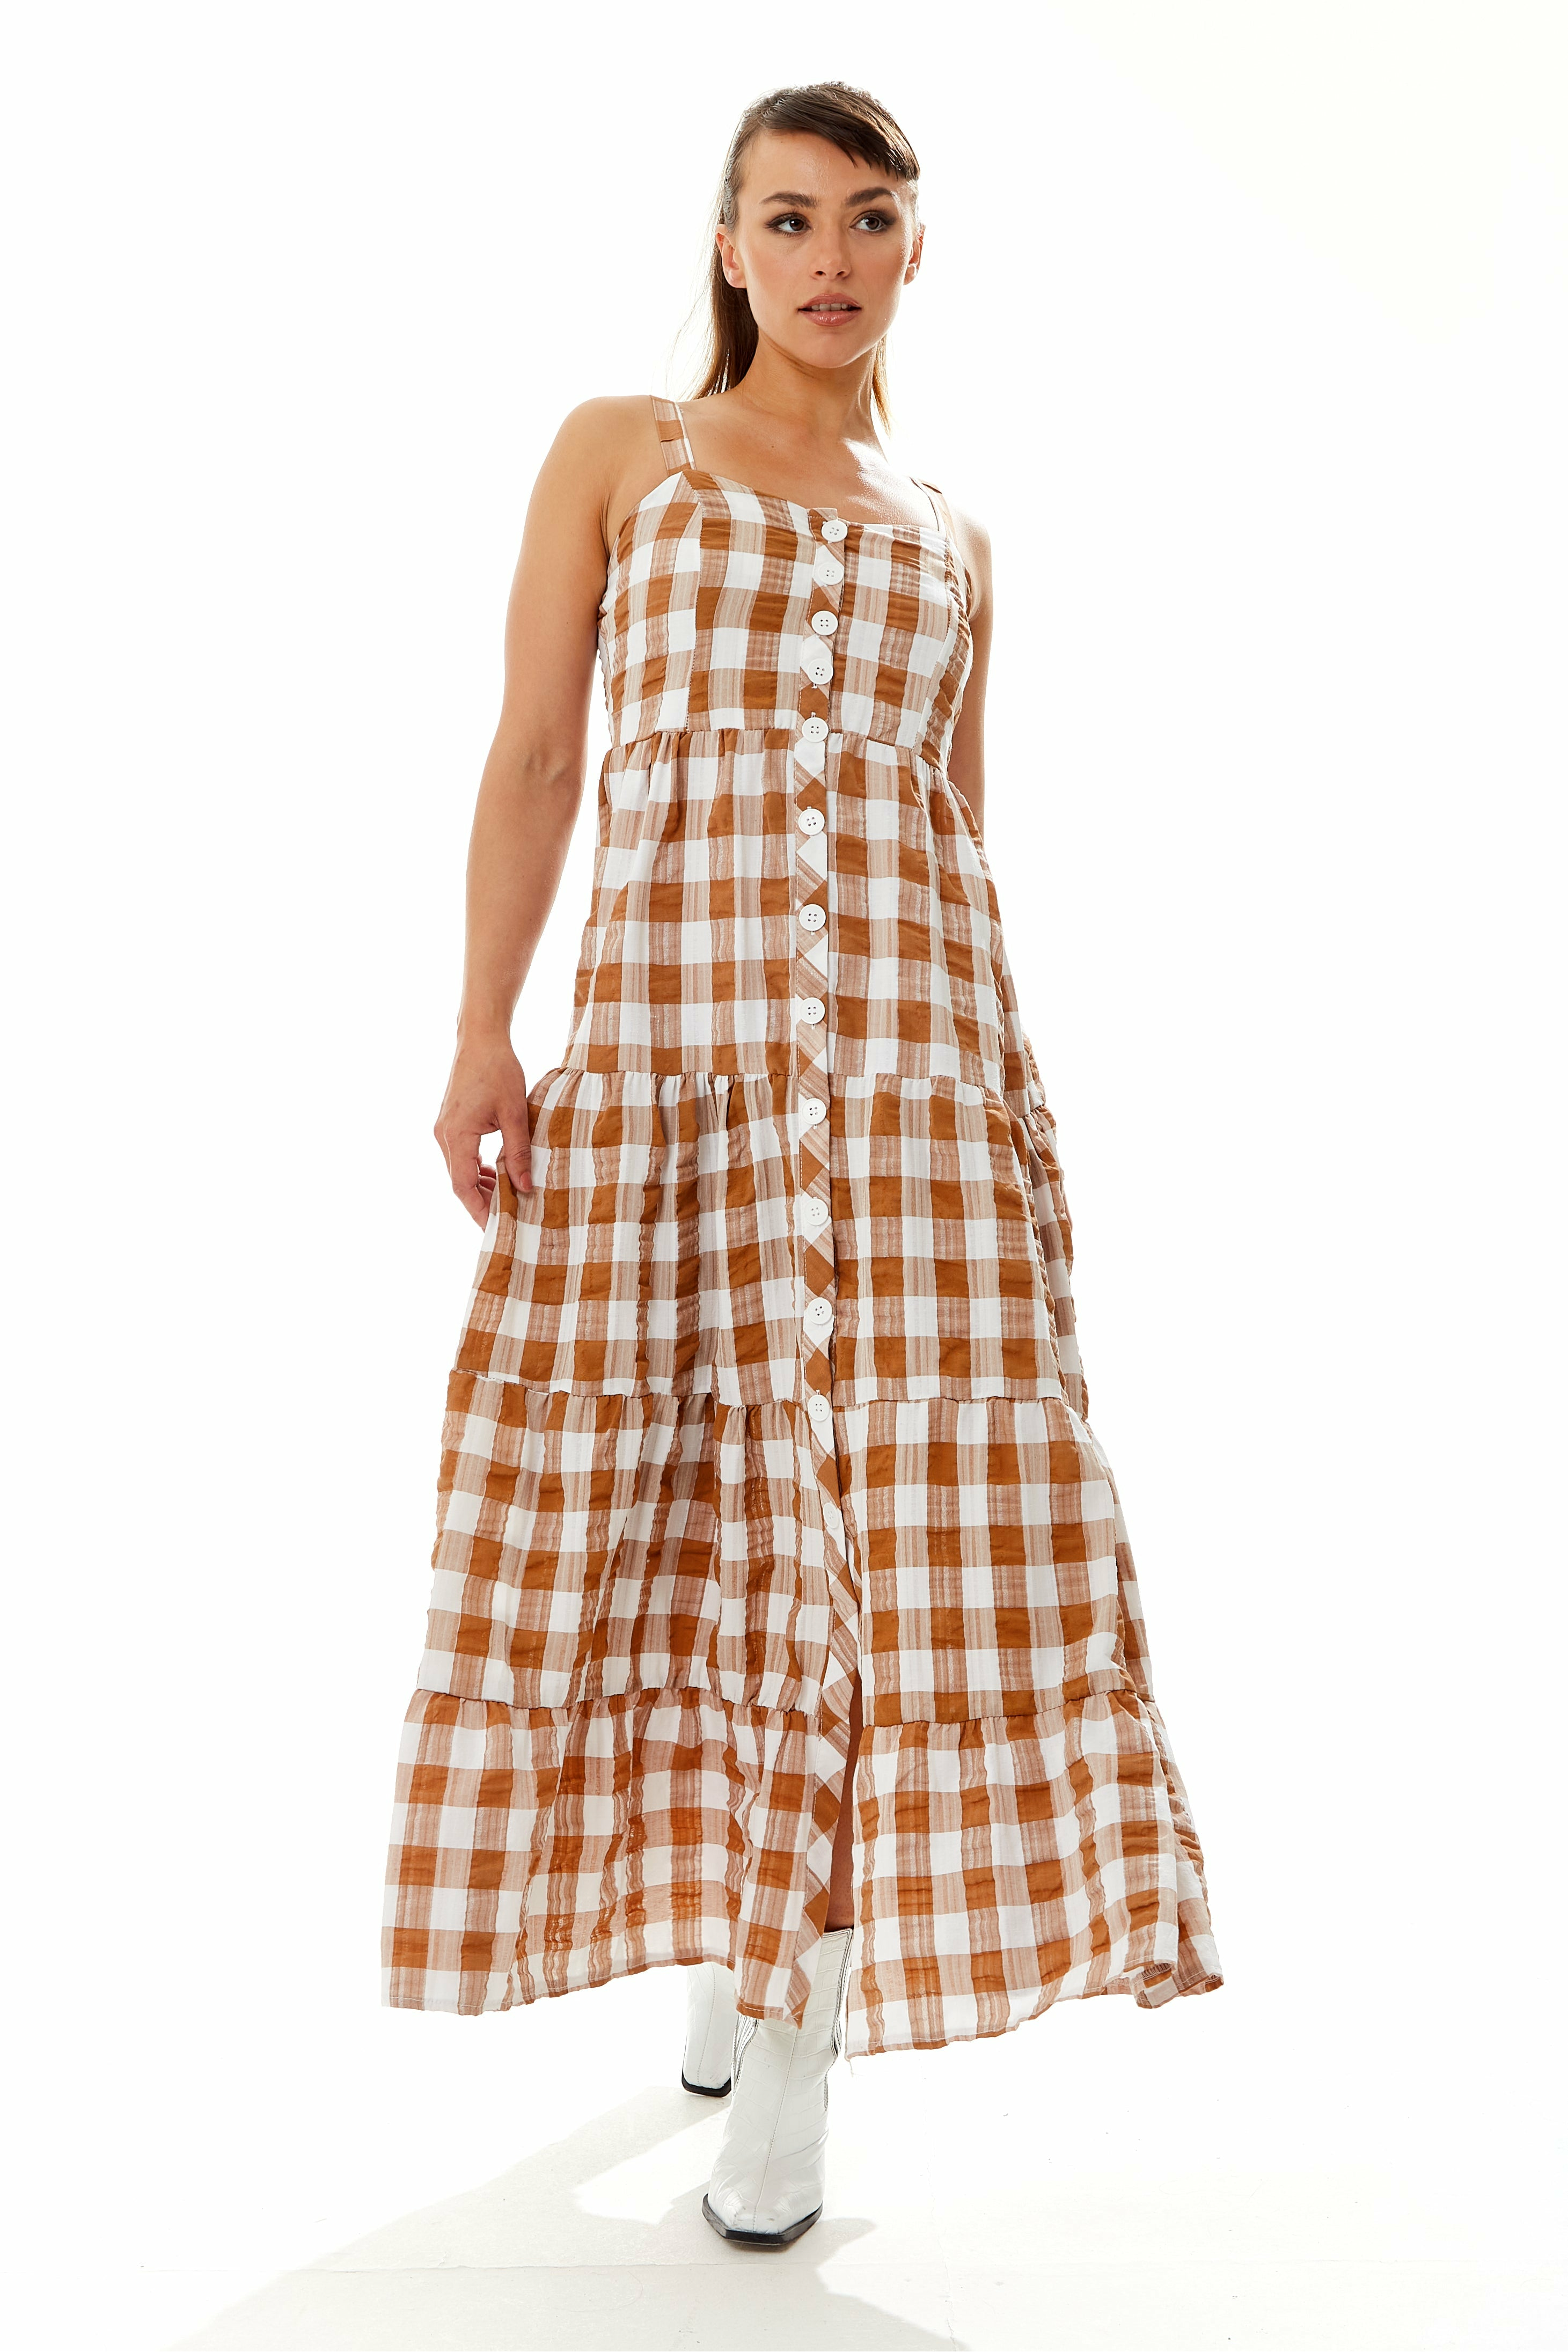 Gingham Print Maxi Dress In Brown And White TRSS22005